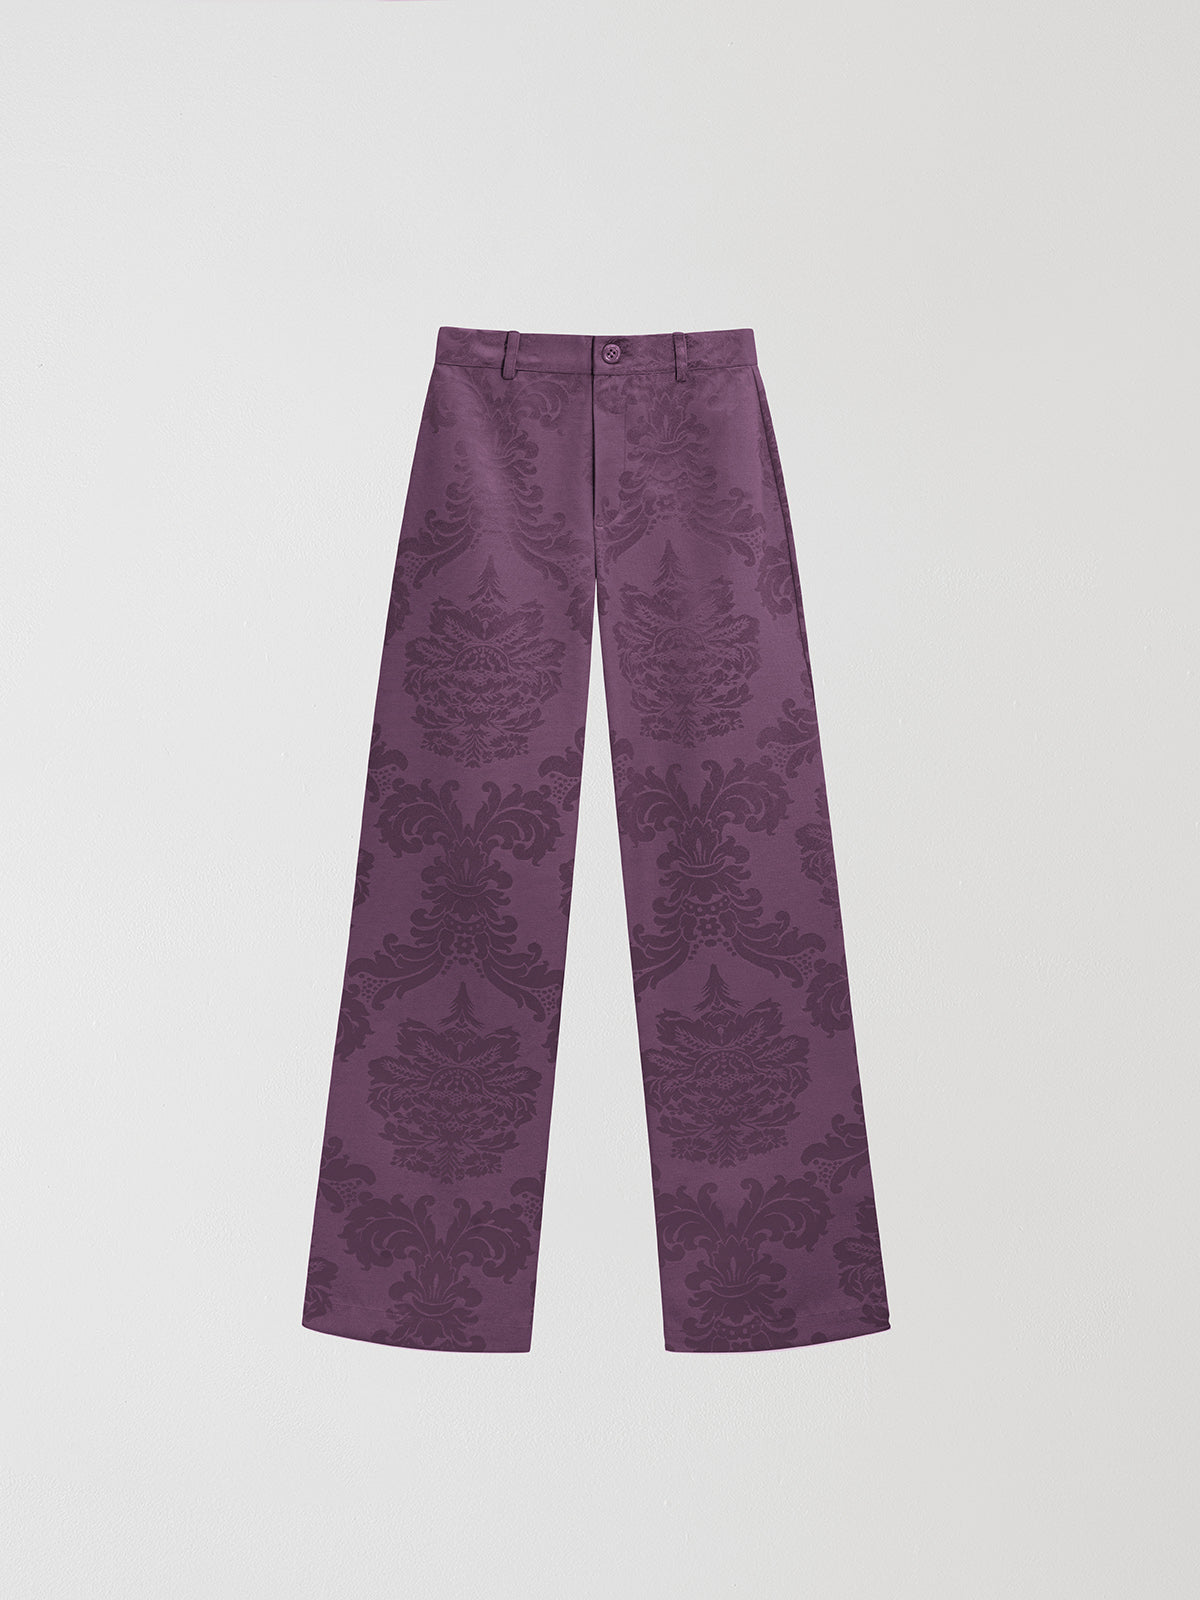 Mei Pants Purple is a purple high-waist pant with matching color print.